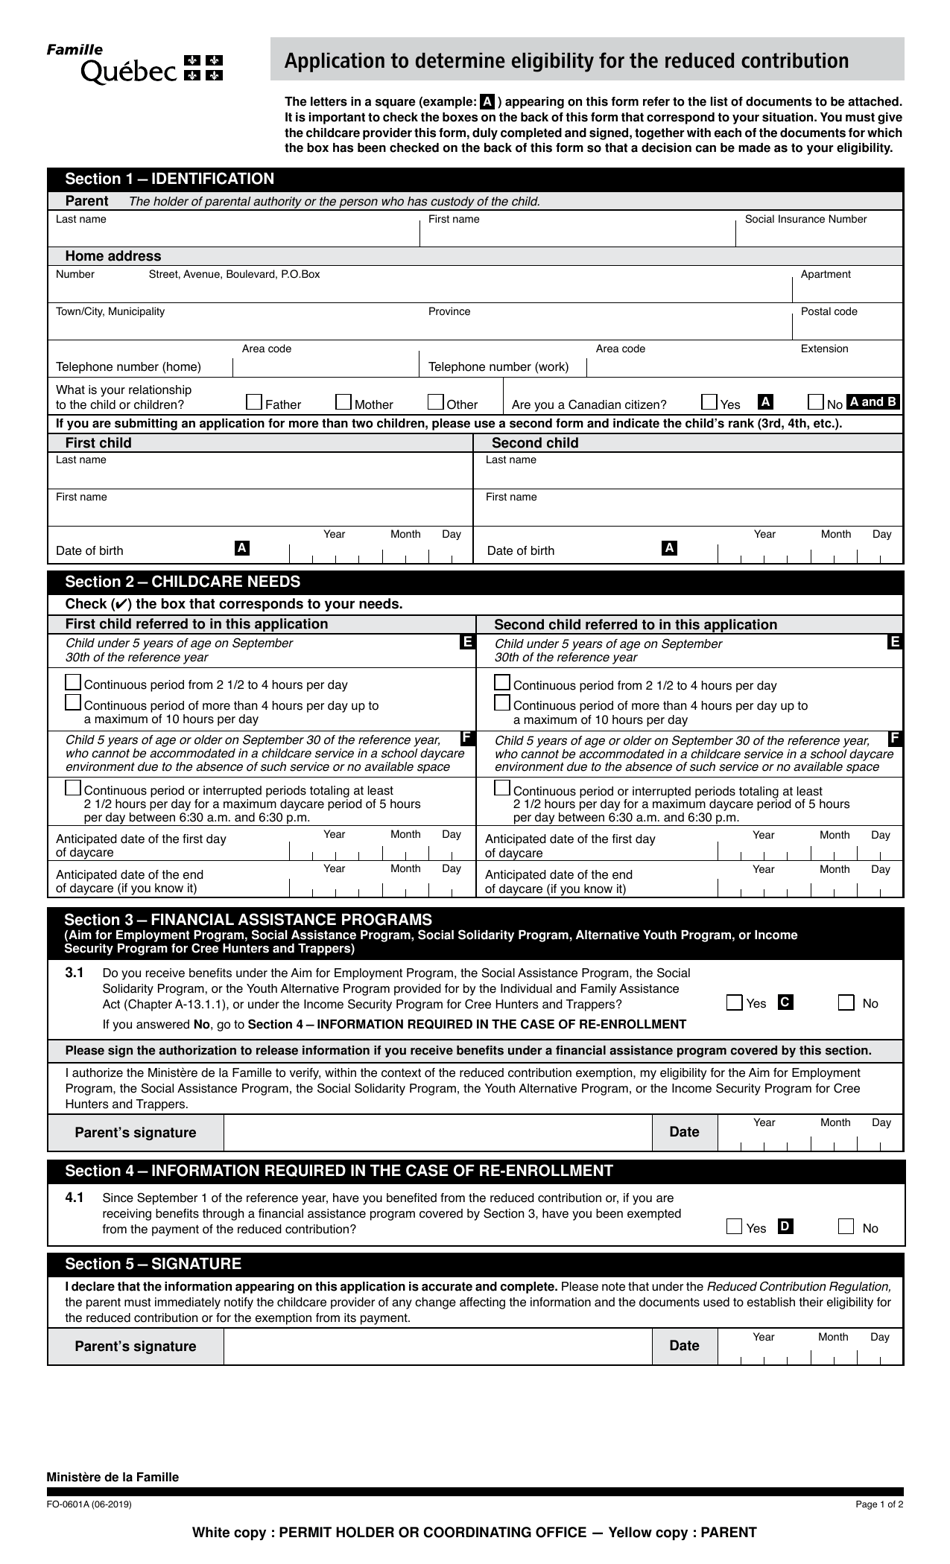 Form FO-0601A Application to Determine Eligibility for the Reduced Contribution - Quebec, Canada, Page 1